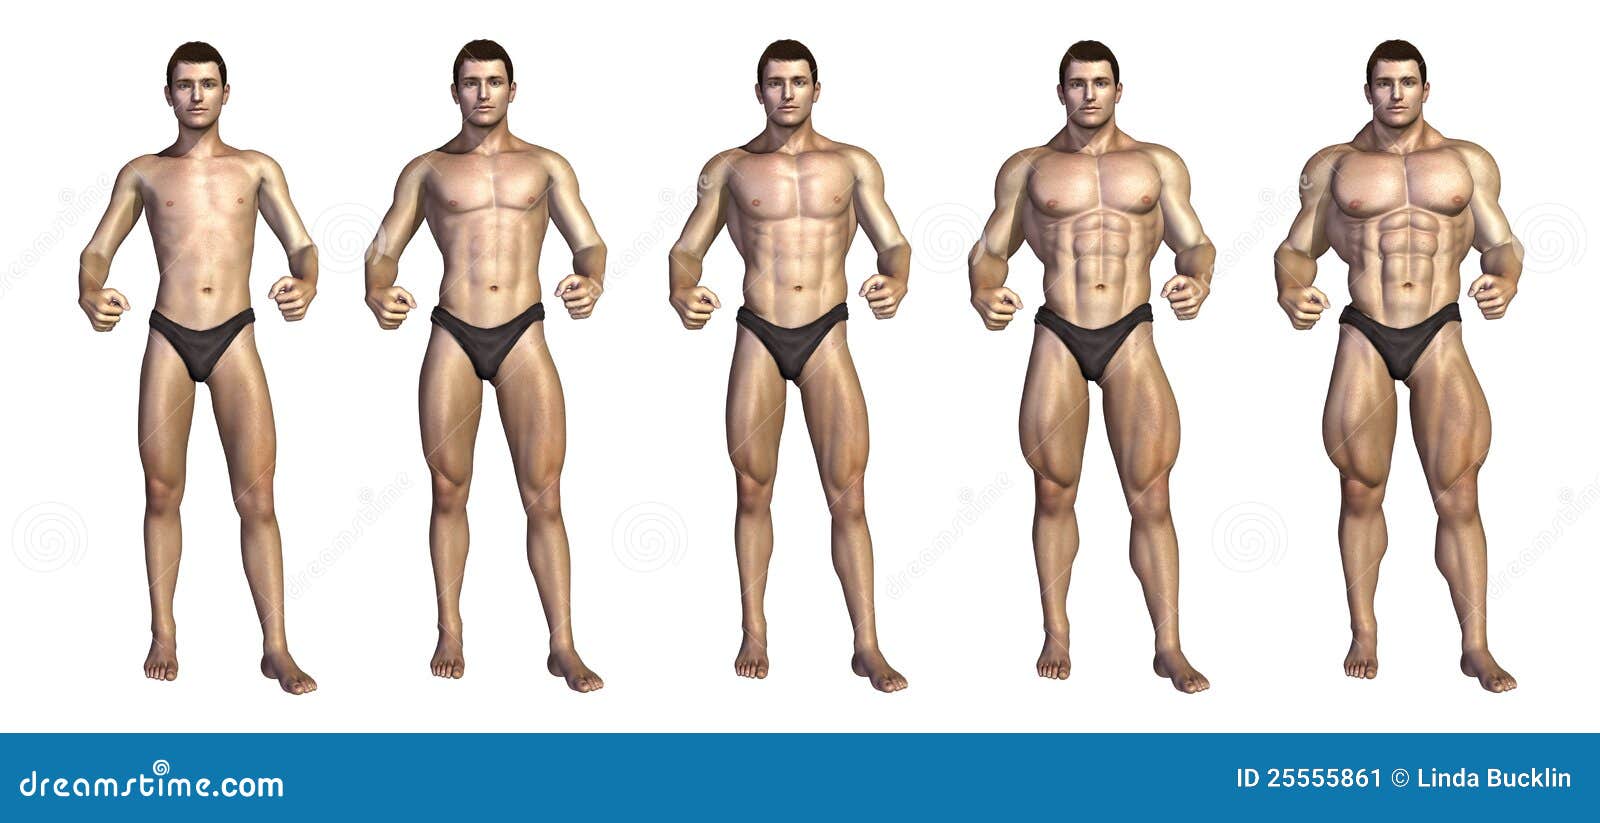 Bodybuilding Exercises Chart Free Download